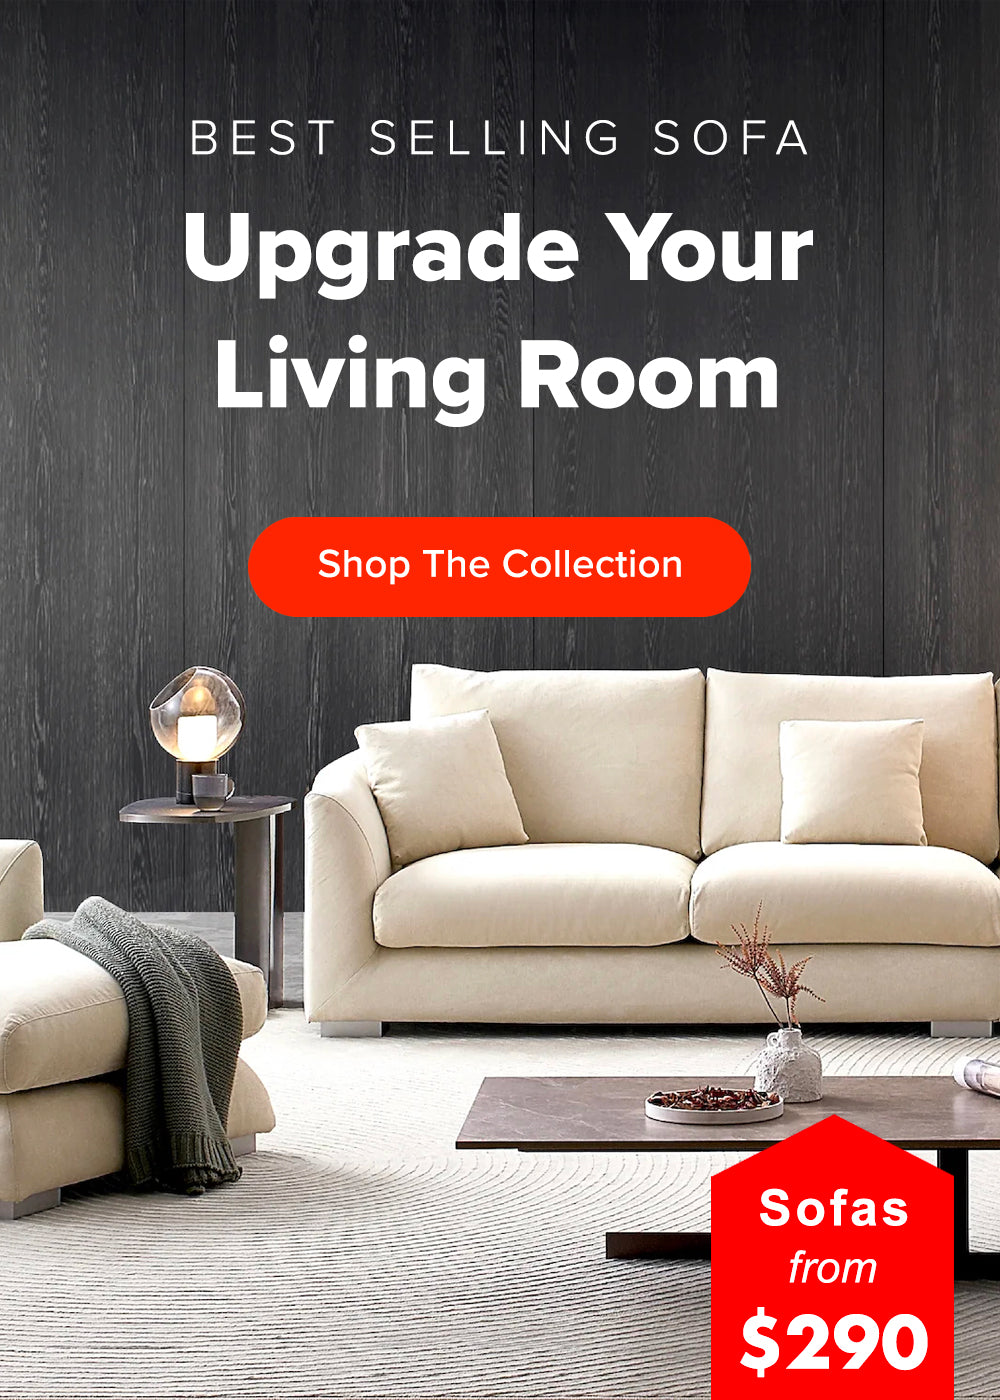 Upgrade Your Living Room